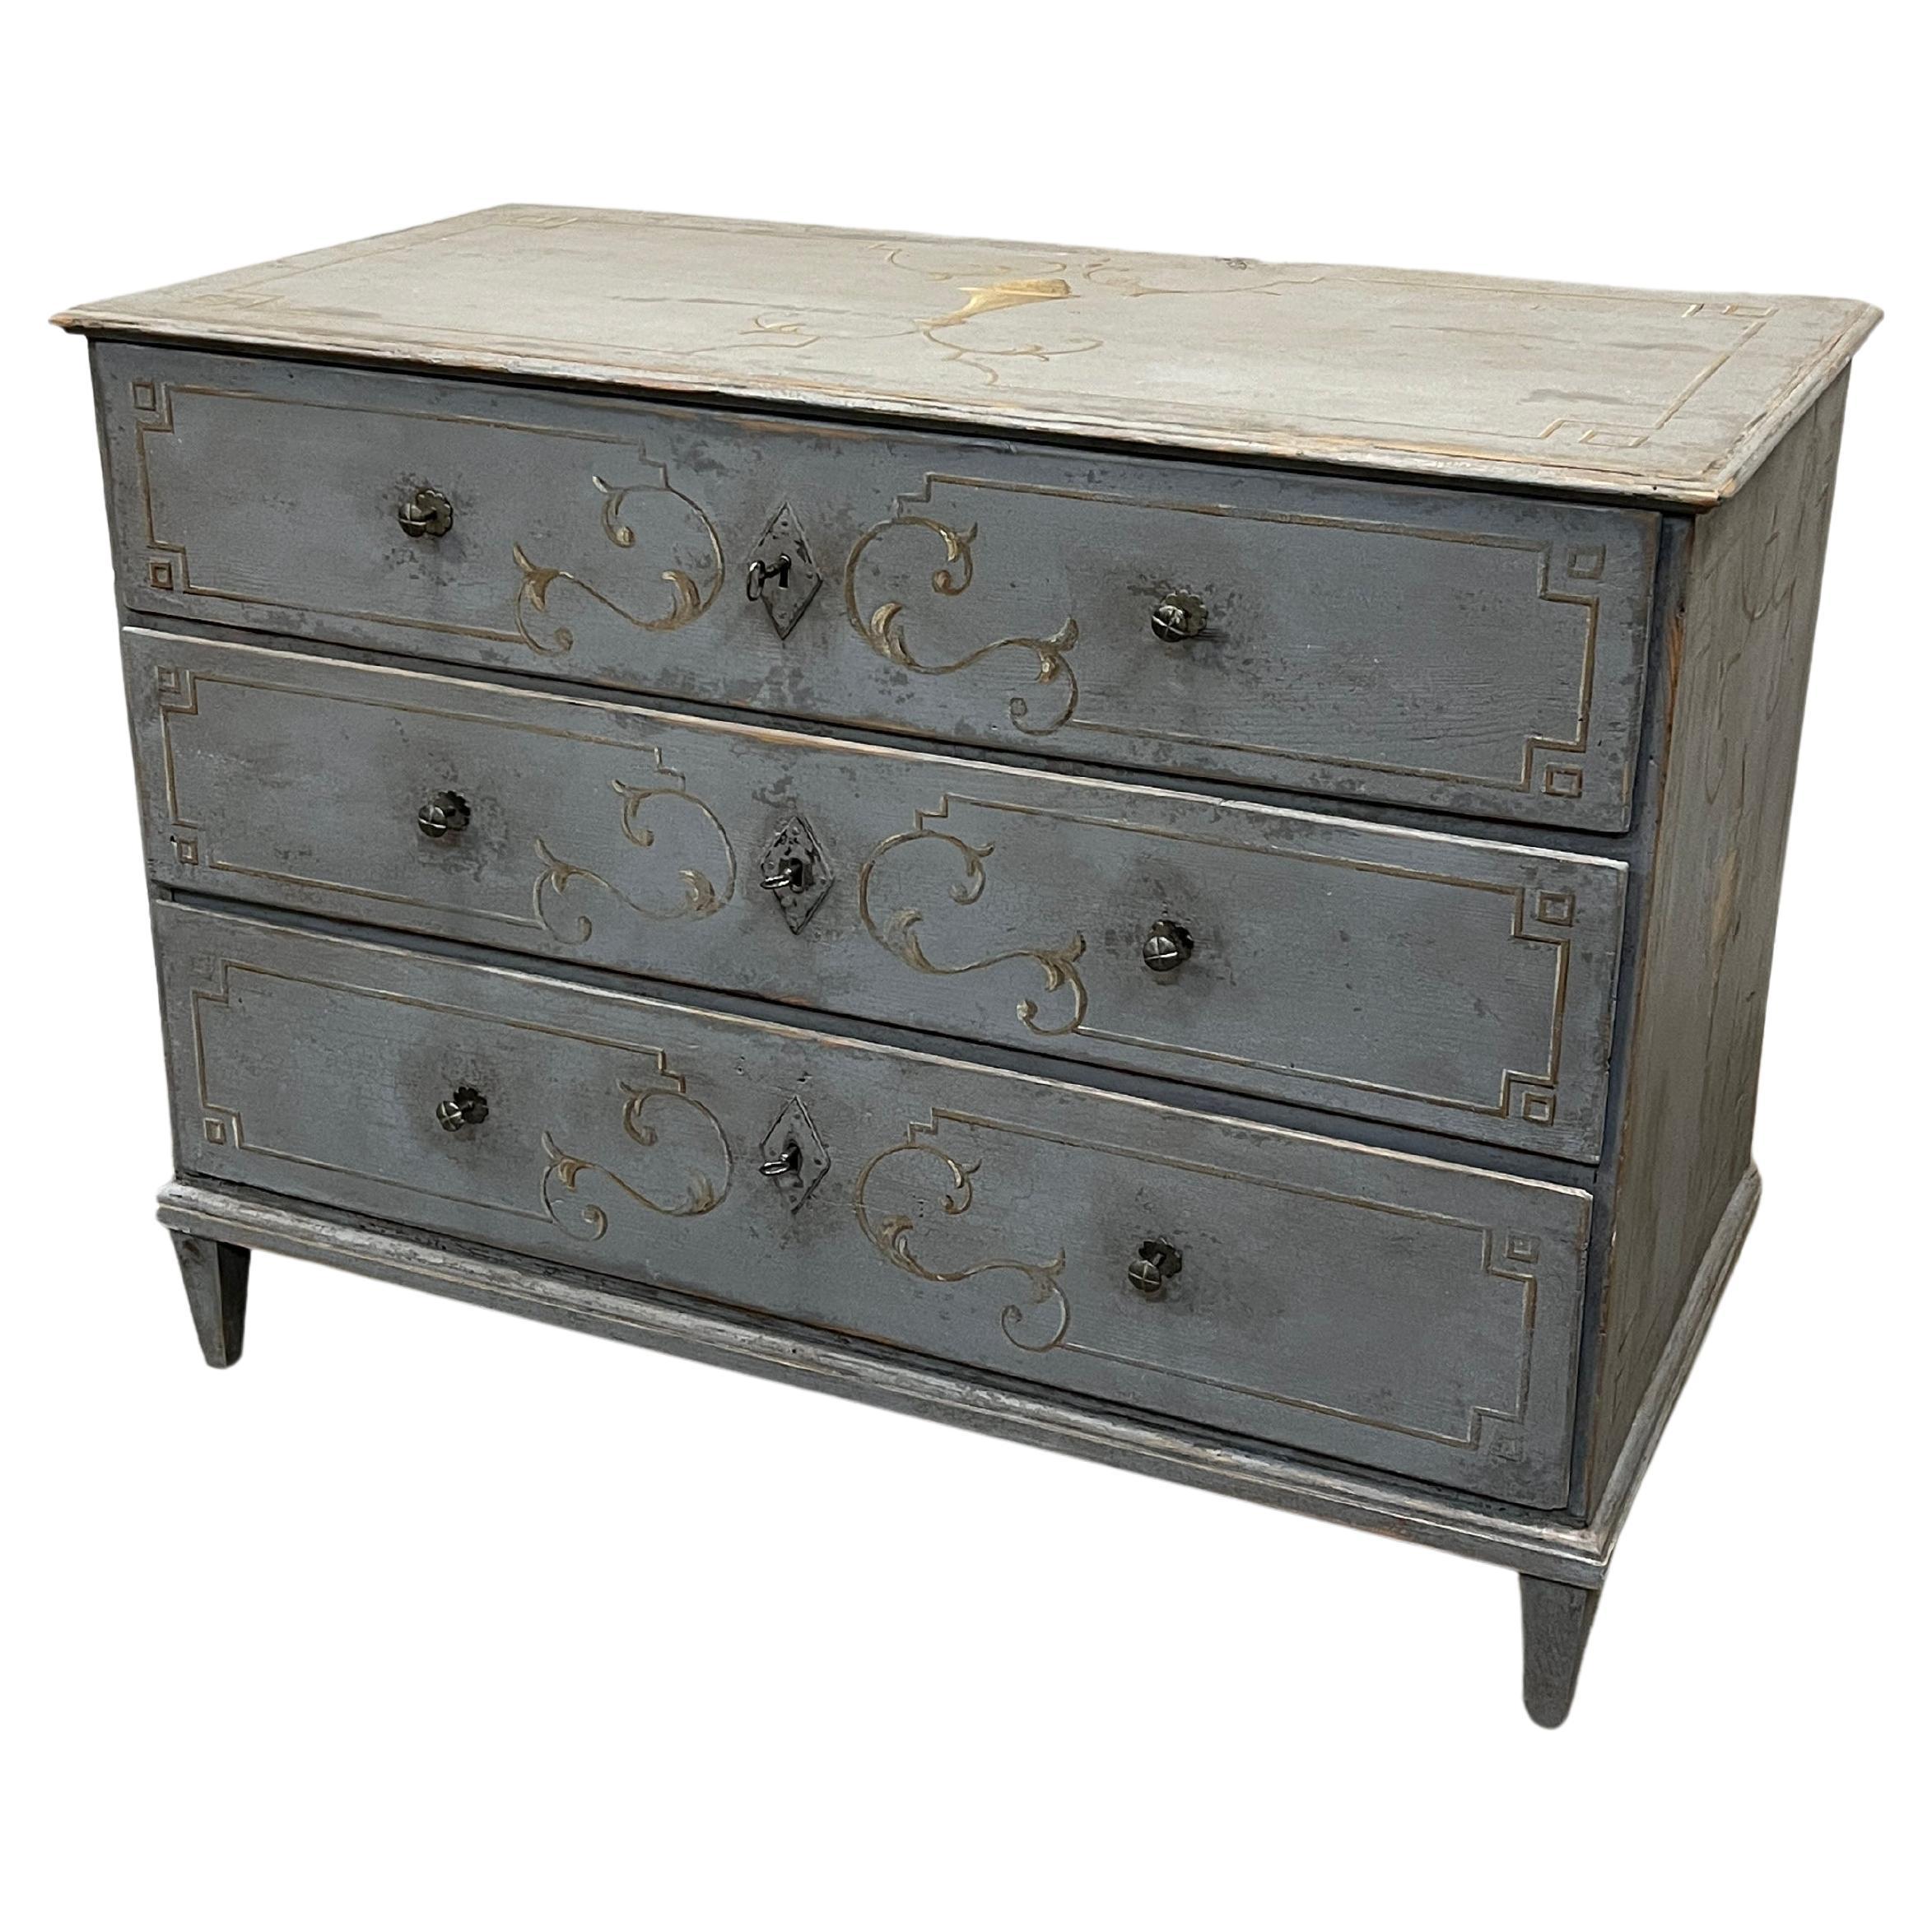 19th Century German Neoclassical Revival Painted Commode